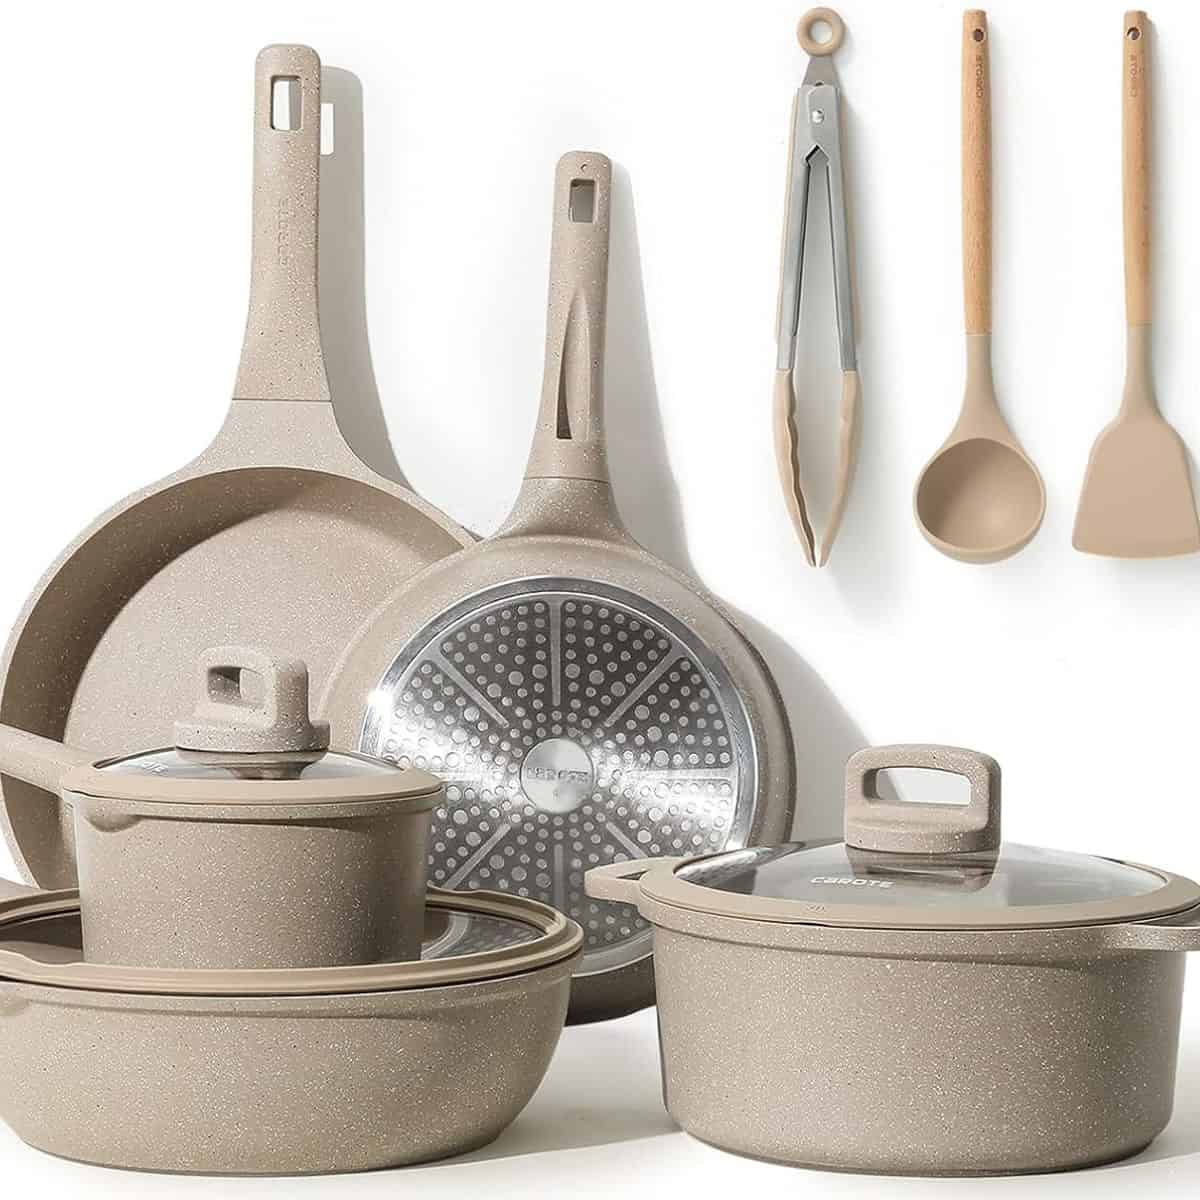 My Favorite Kitchen Deals from Amazon's Spring Prime Day Sale!